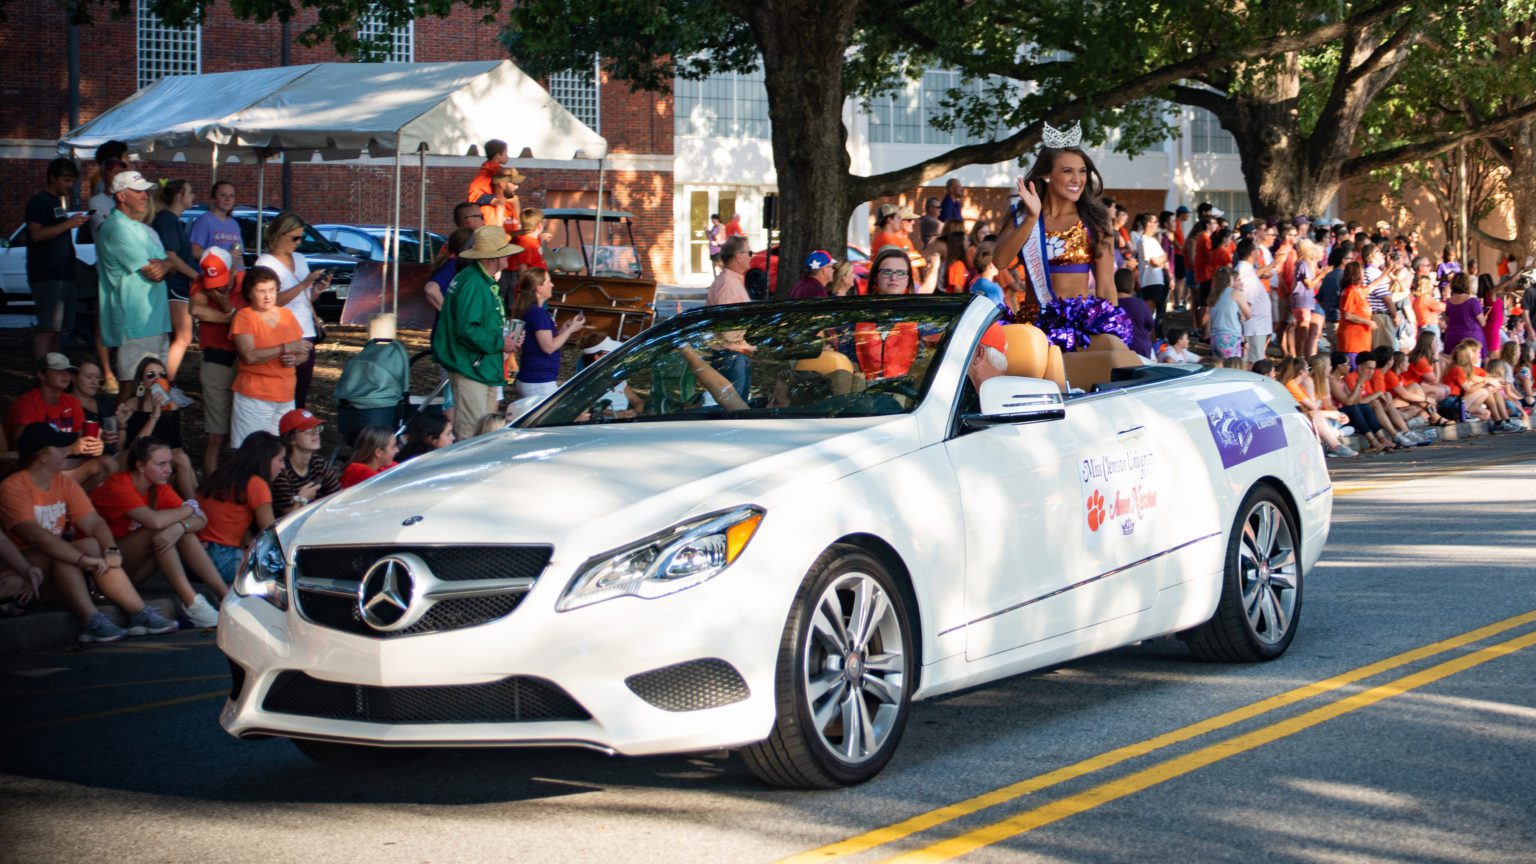 First Friday Parade scheduled for September 10, route returns to